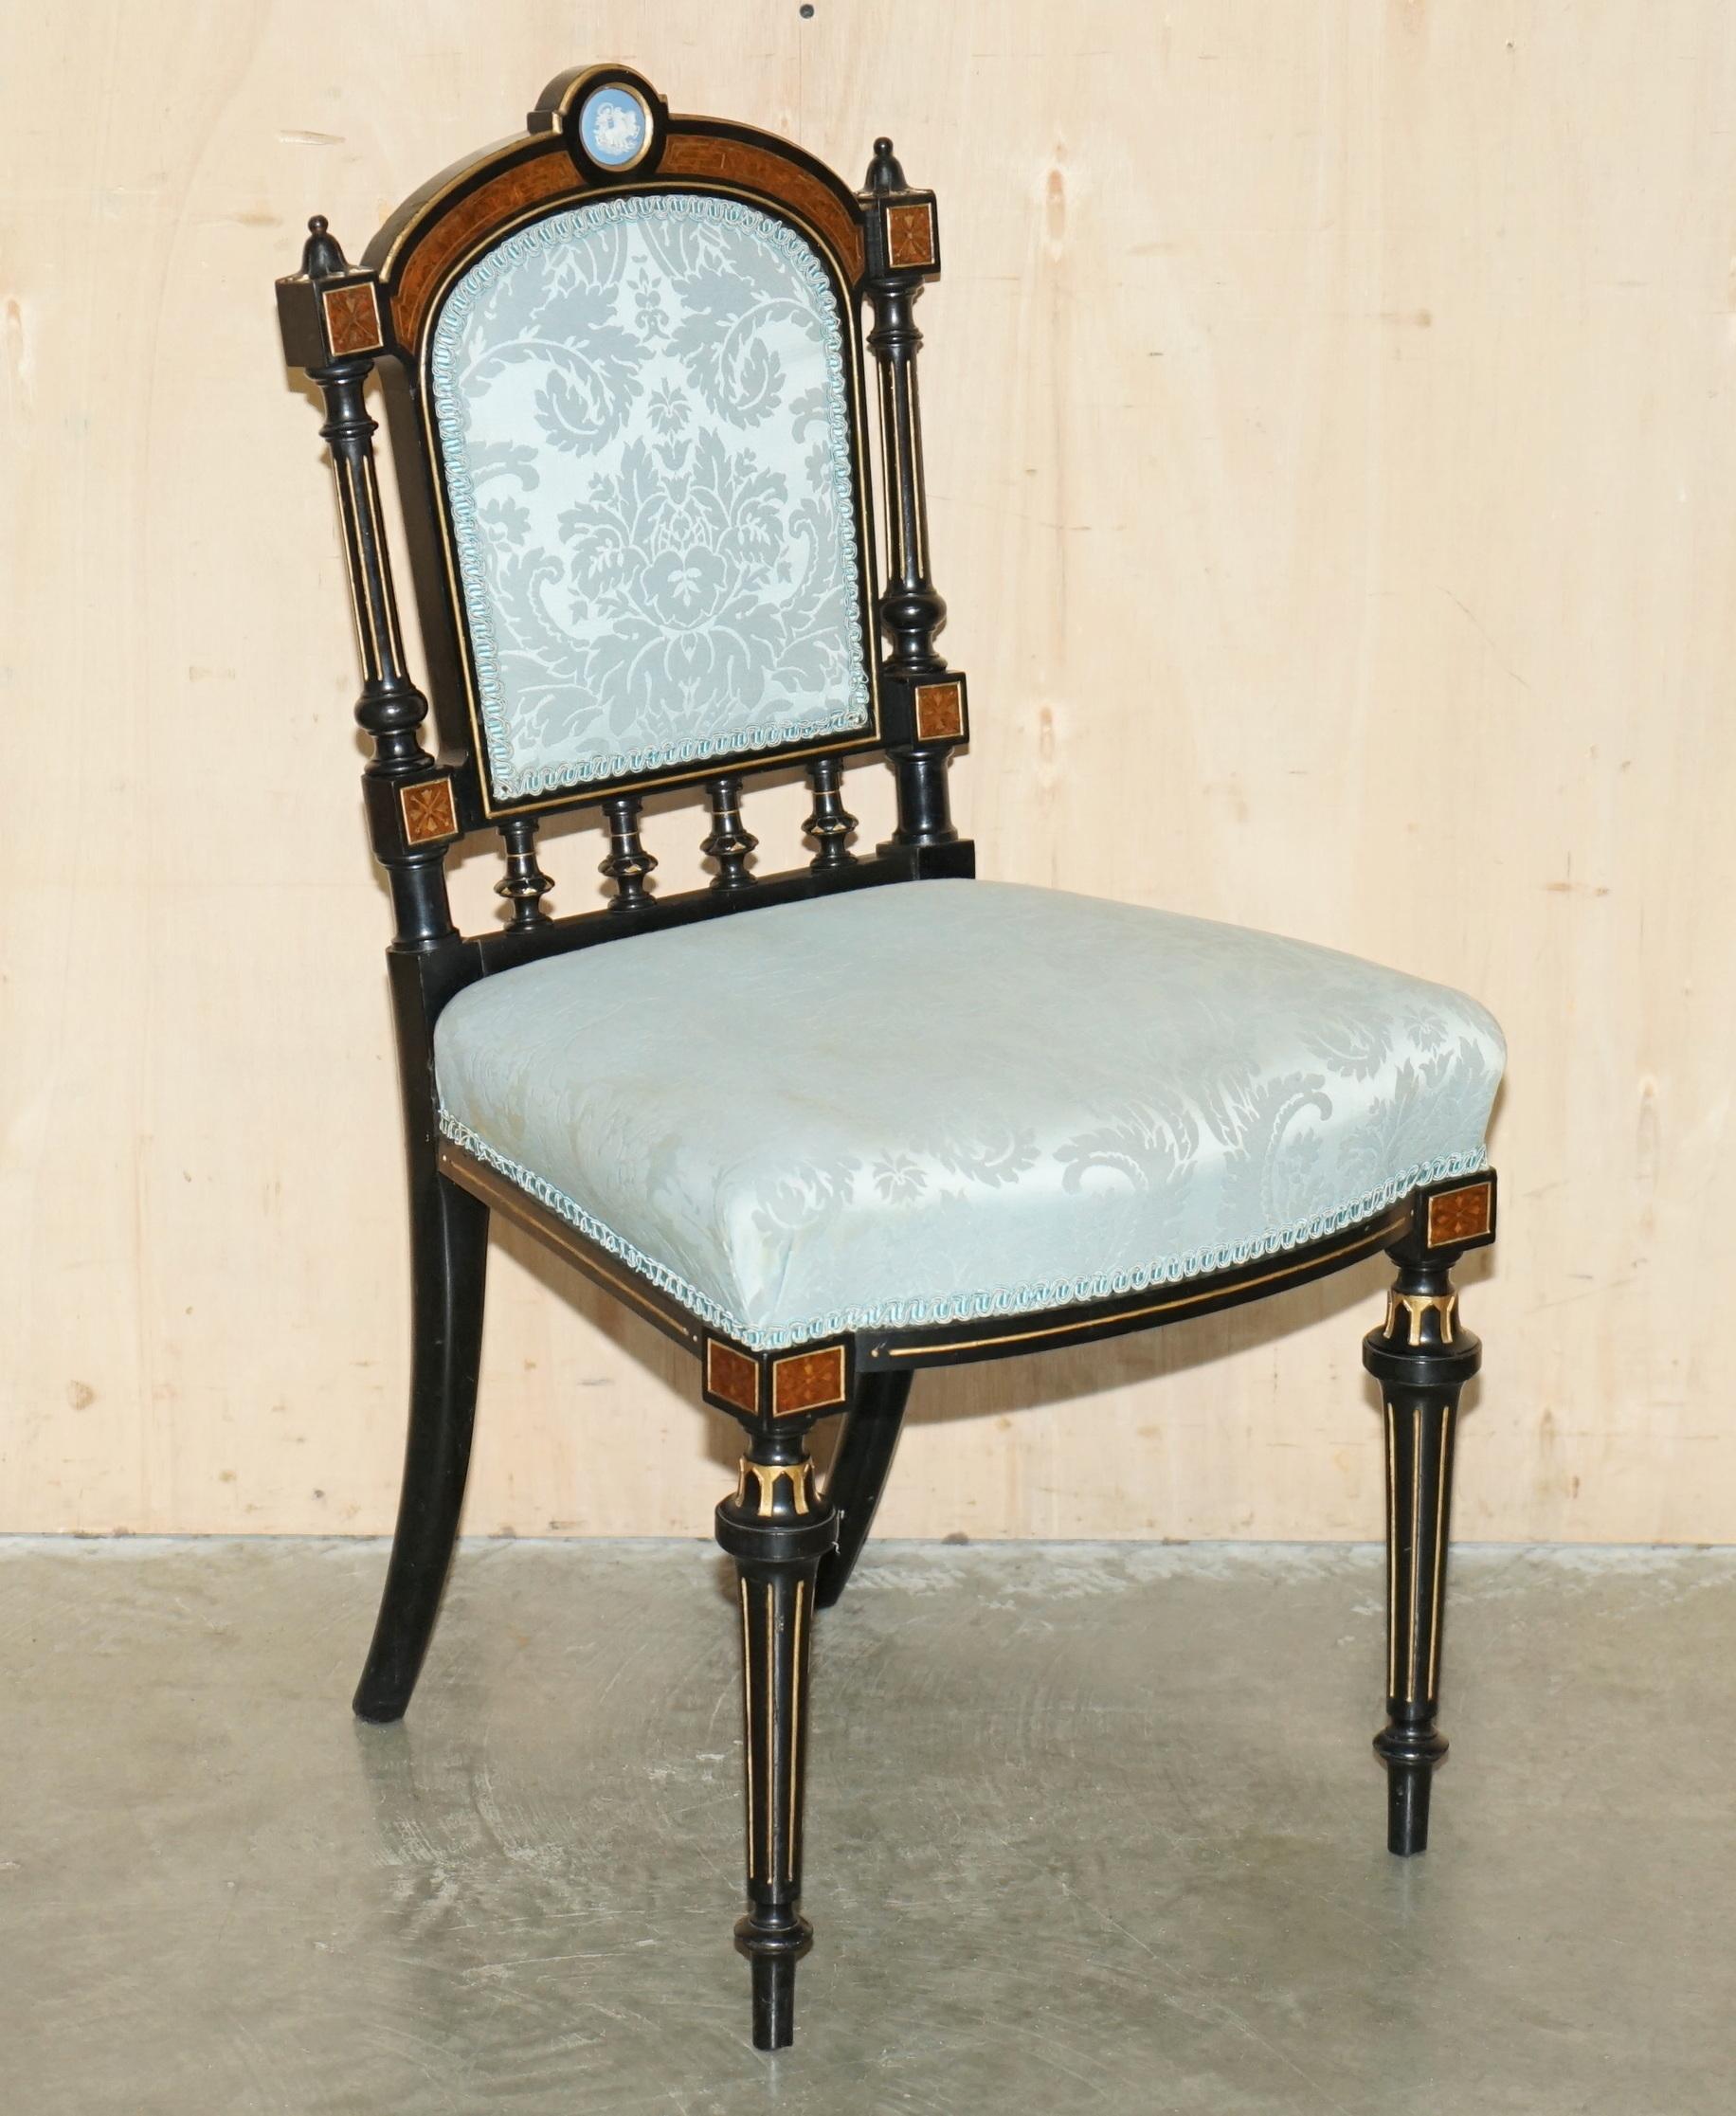 Royal House Antiques


Royal House Antiques is delighted to offer for sale this suite of four very rare, highly collectable Burr Walnut & Ebony framed Victorian Aesthetic Movement dining chairs with a inset Grand Tour plaques that are part of a